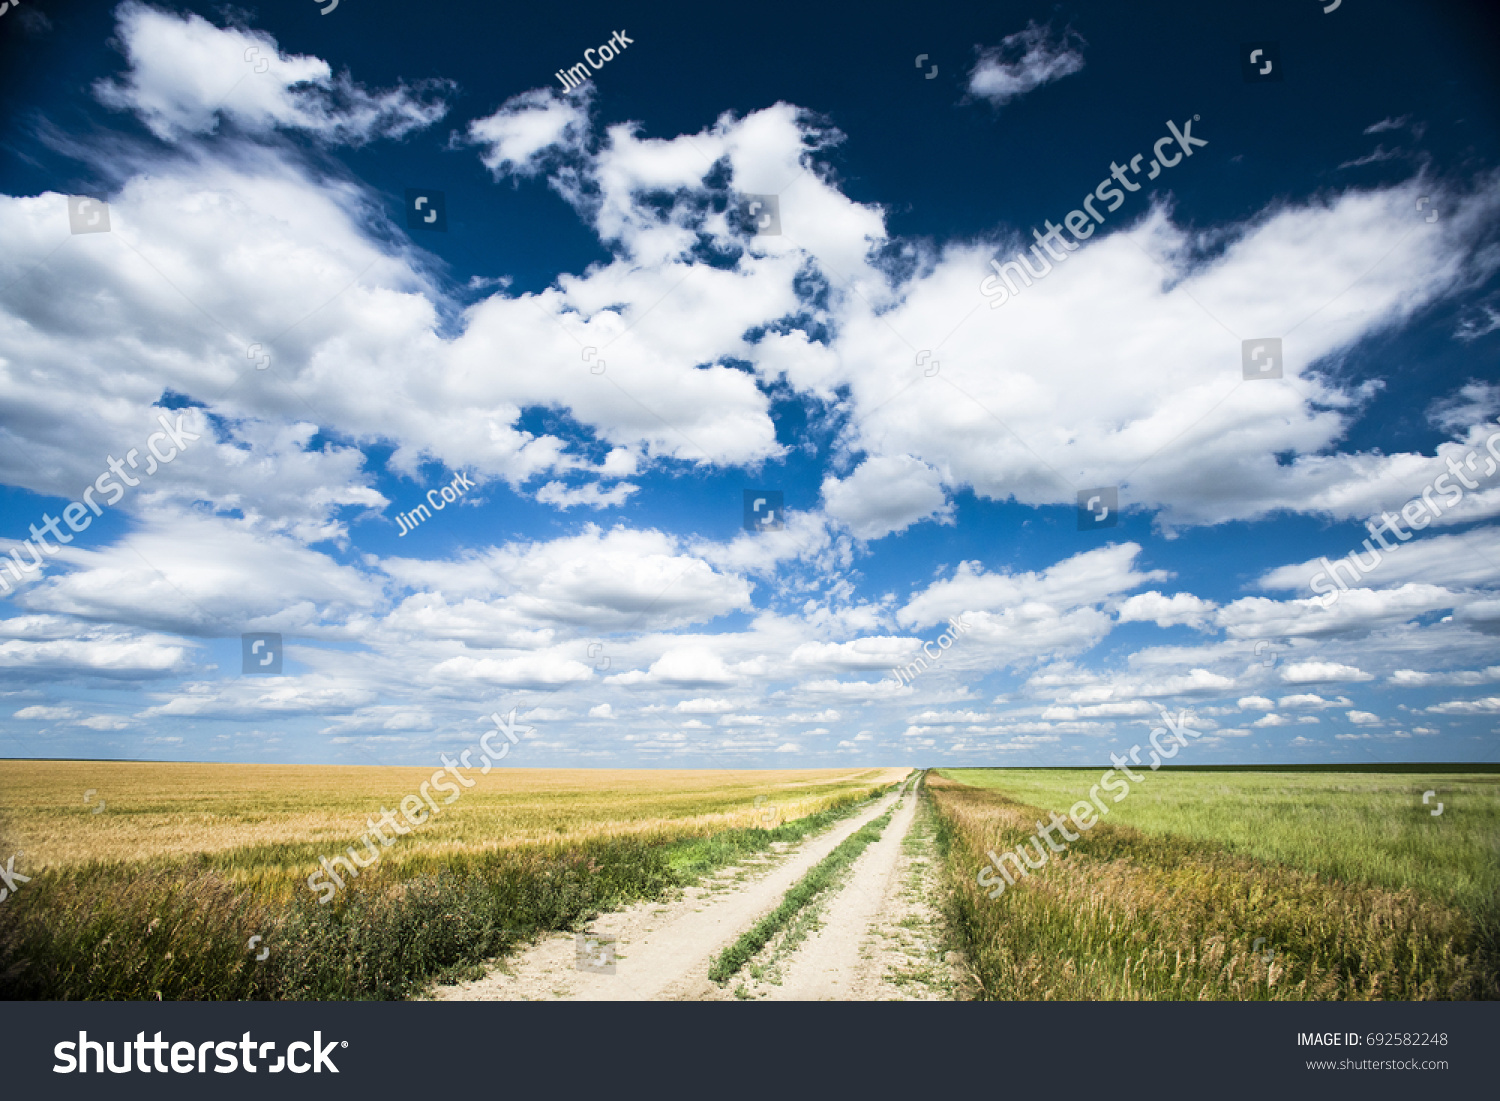 A dirt road cuts through farm land and a sky filled with dramatic clouds.  #692582248